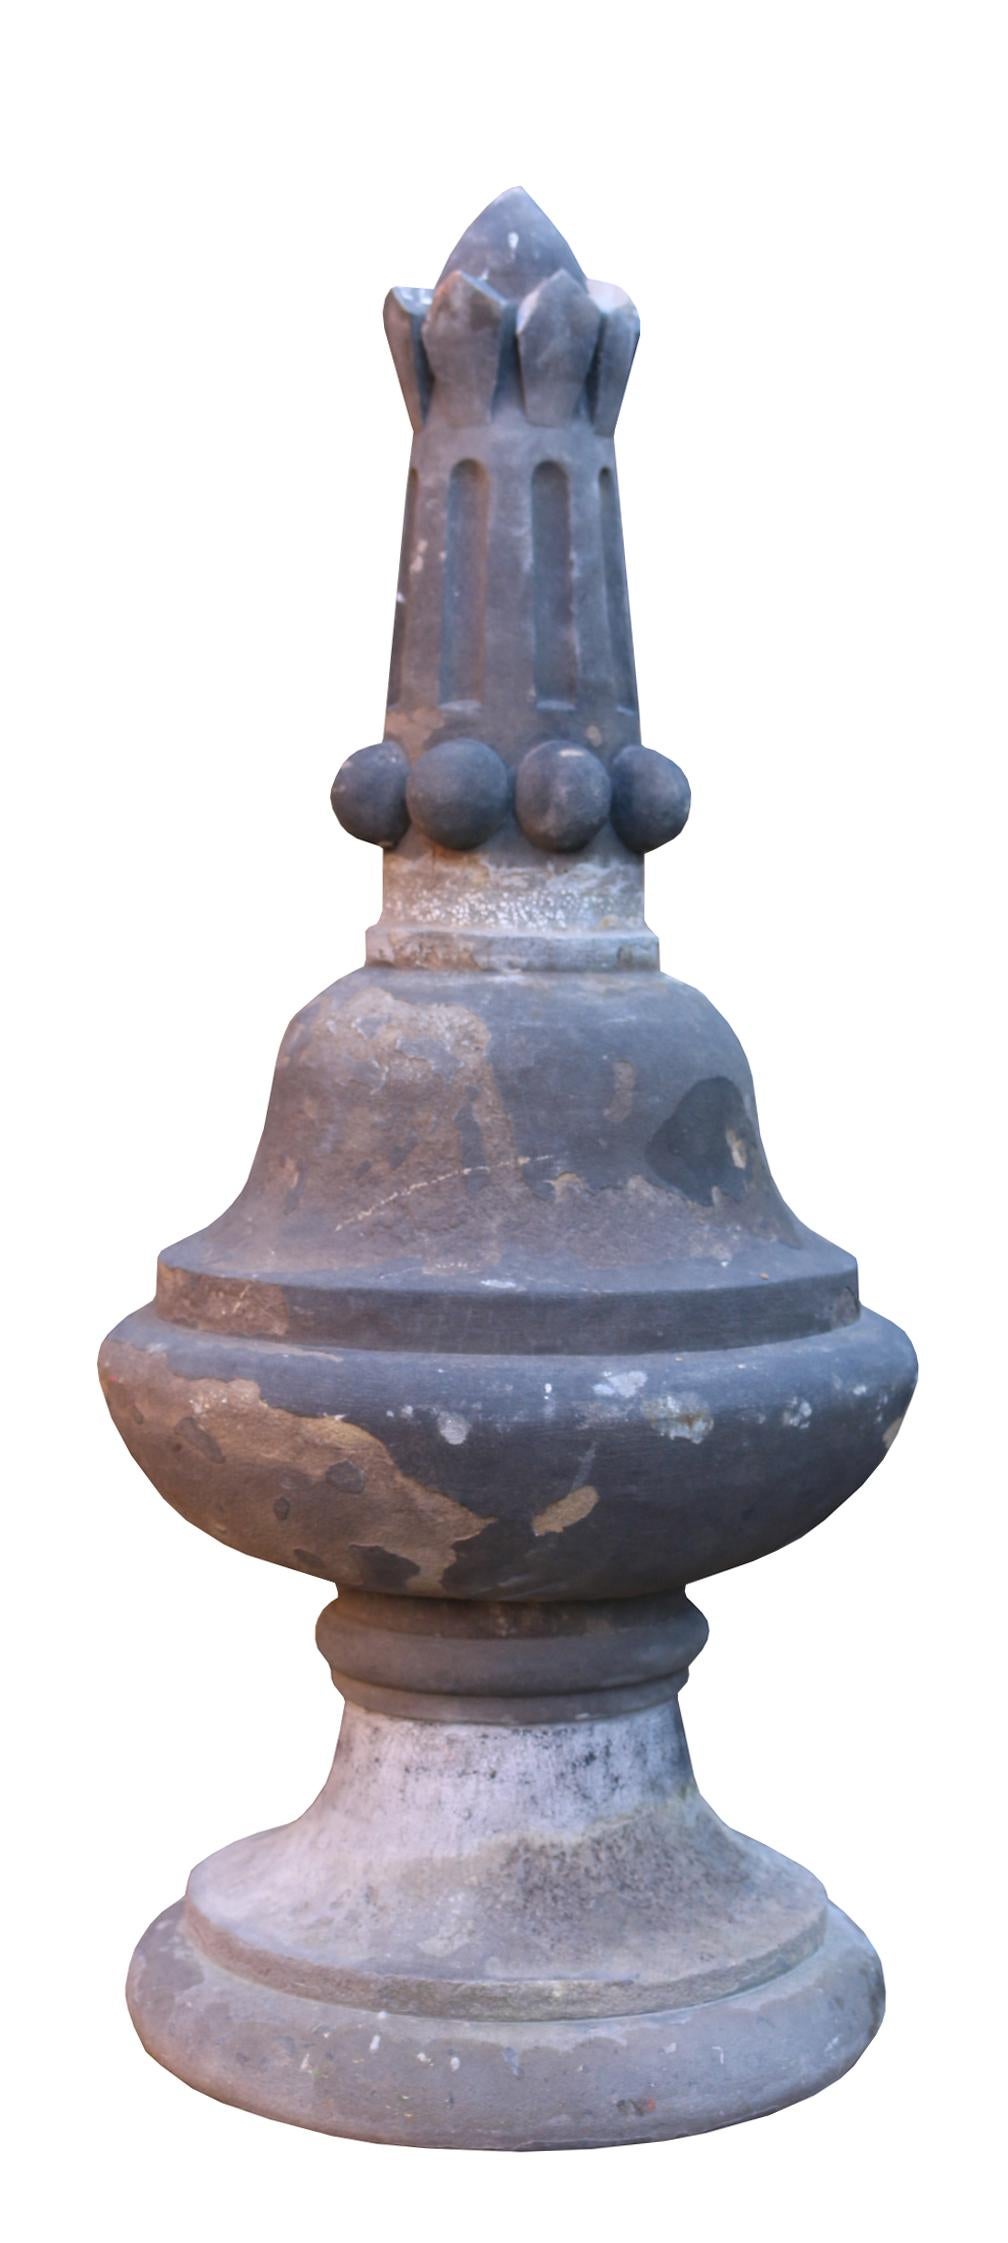 Set of Antique Yorkstone Gate Pier Finials In Good Condition For Sale In Wormelow, Herefordshire